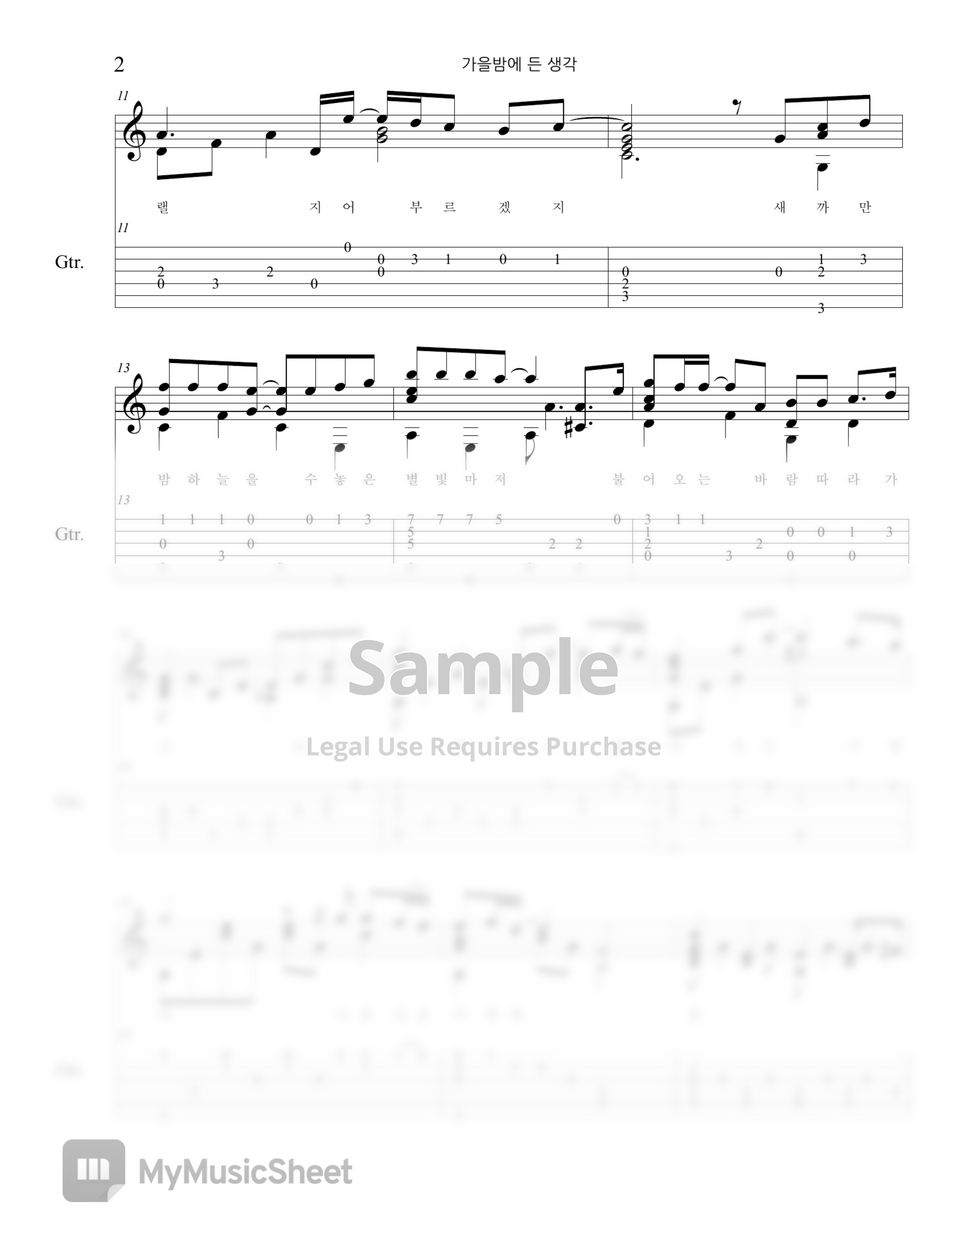 JANNABI - A thought on an autumn night (Guitar TAB) by Woojeong Park